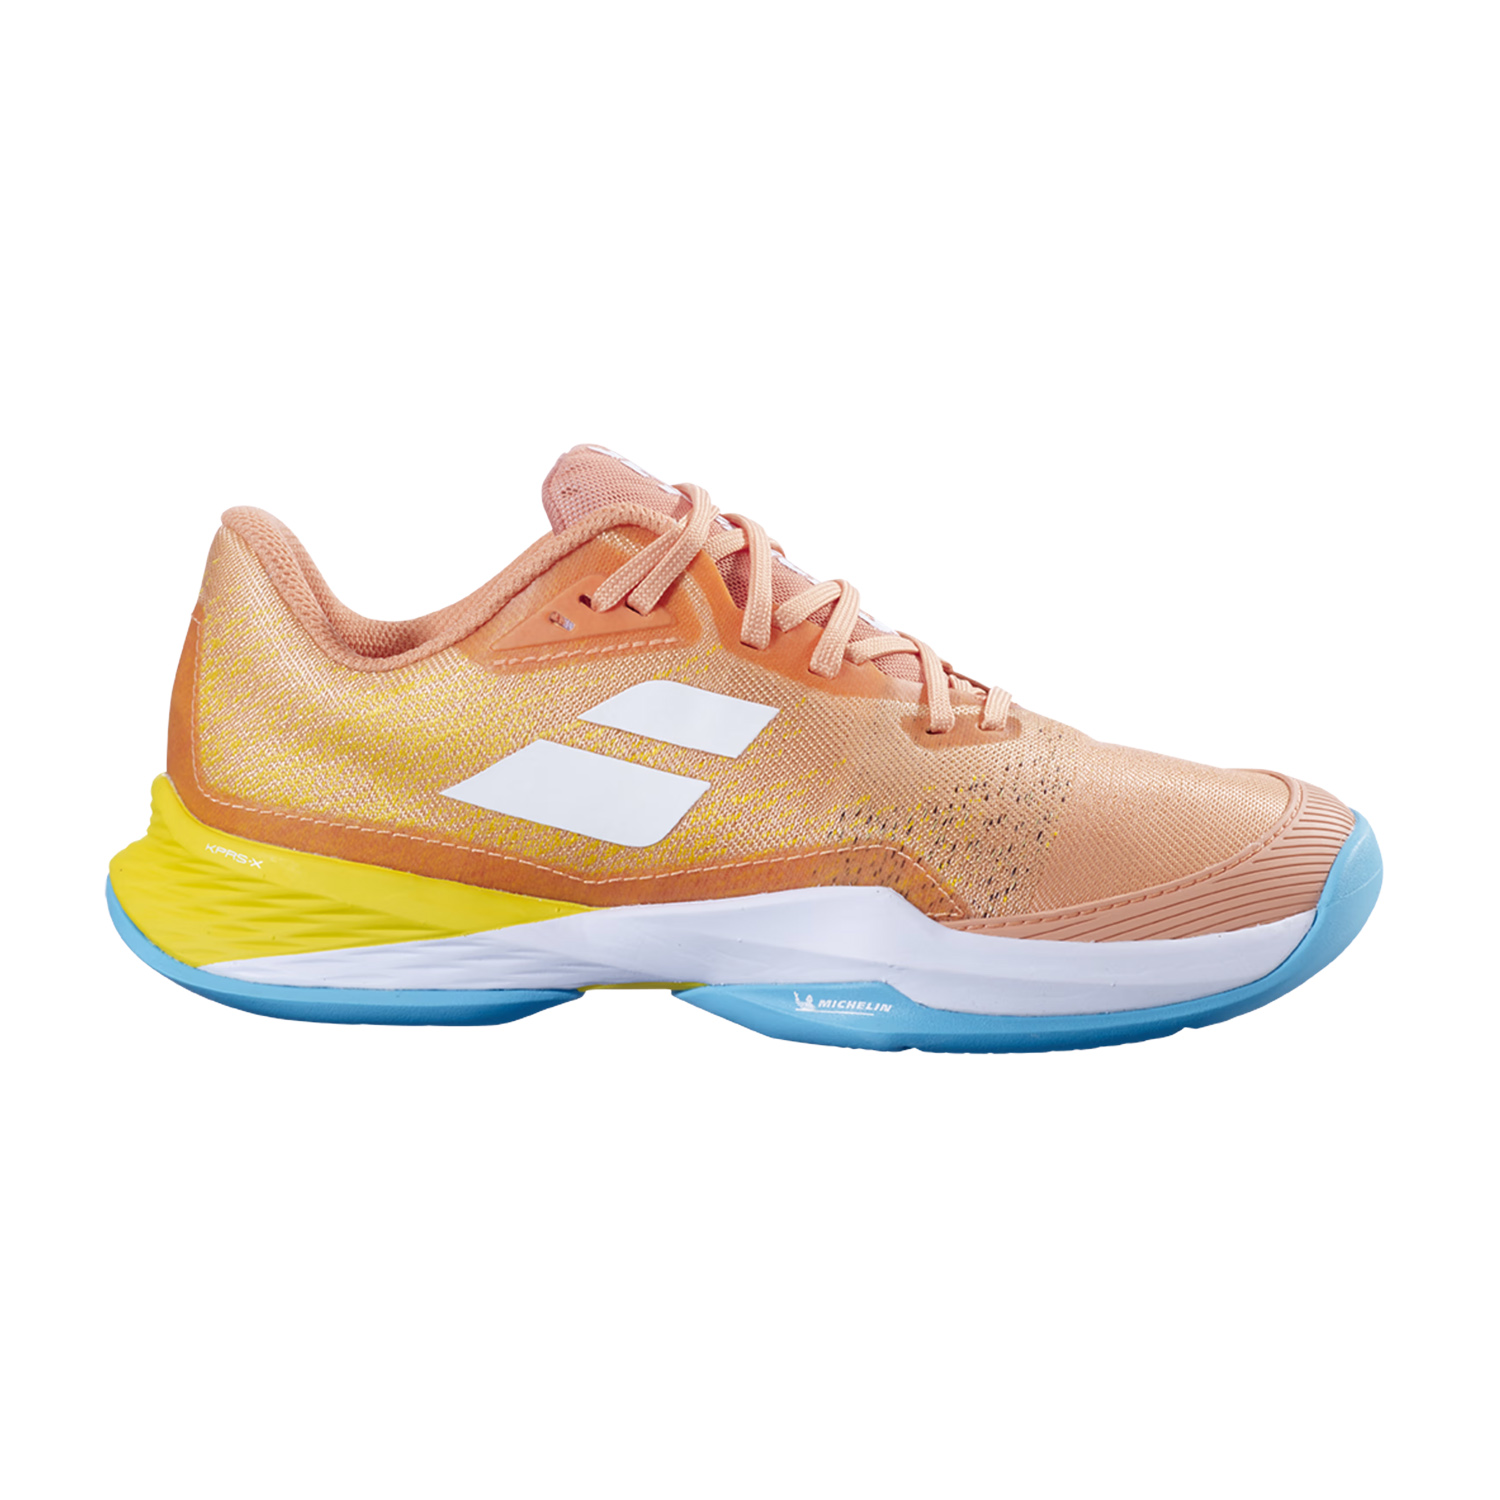 Babolat Jet Mach 3 All Court Bambini - Coral/Gold Fusion